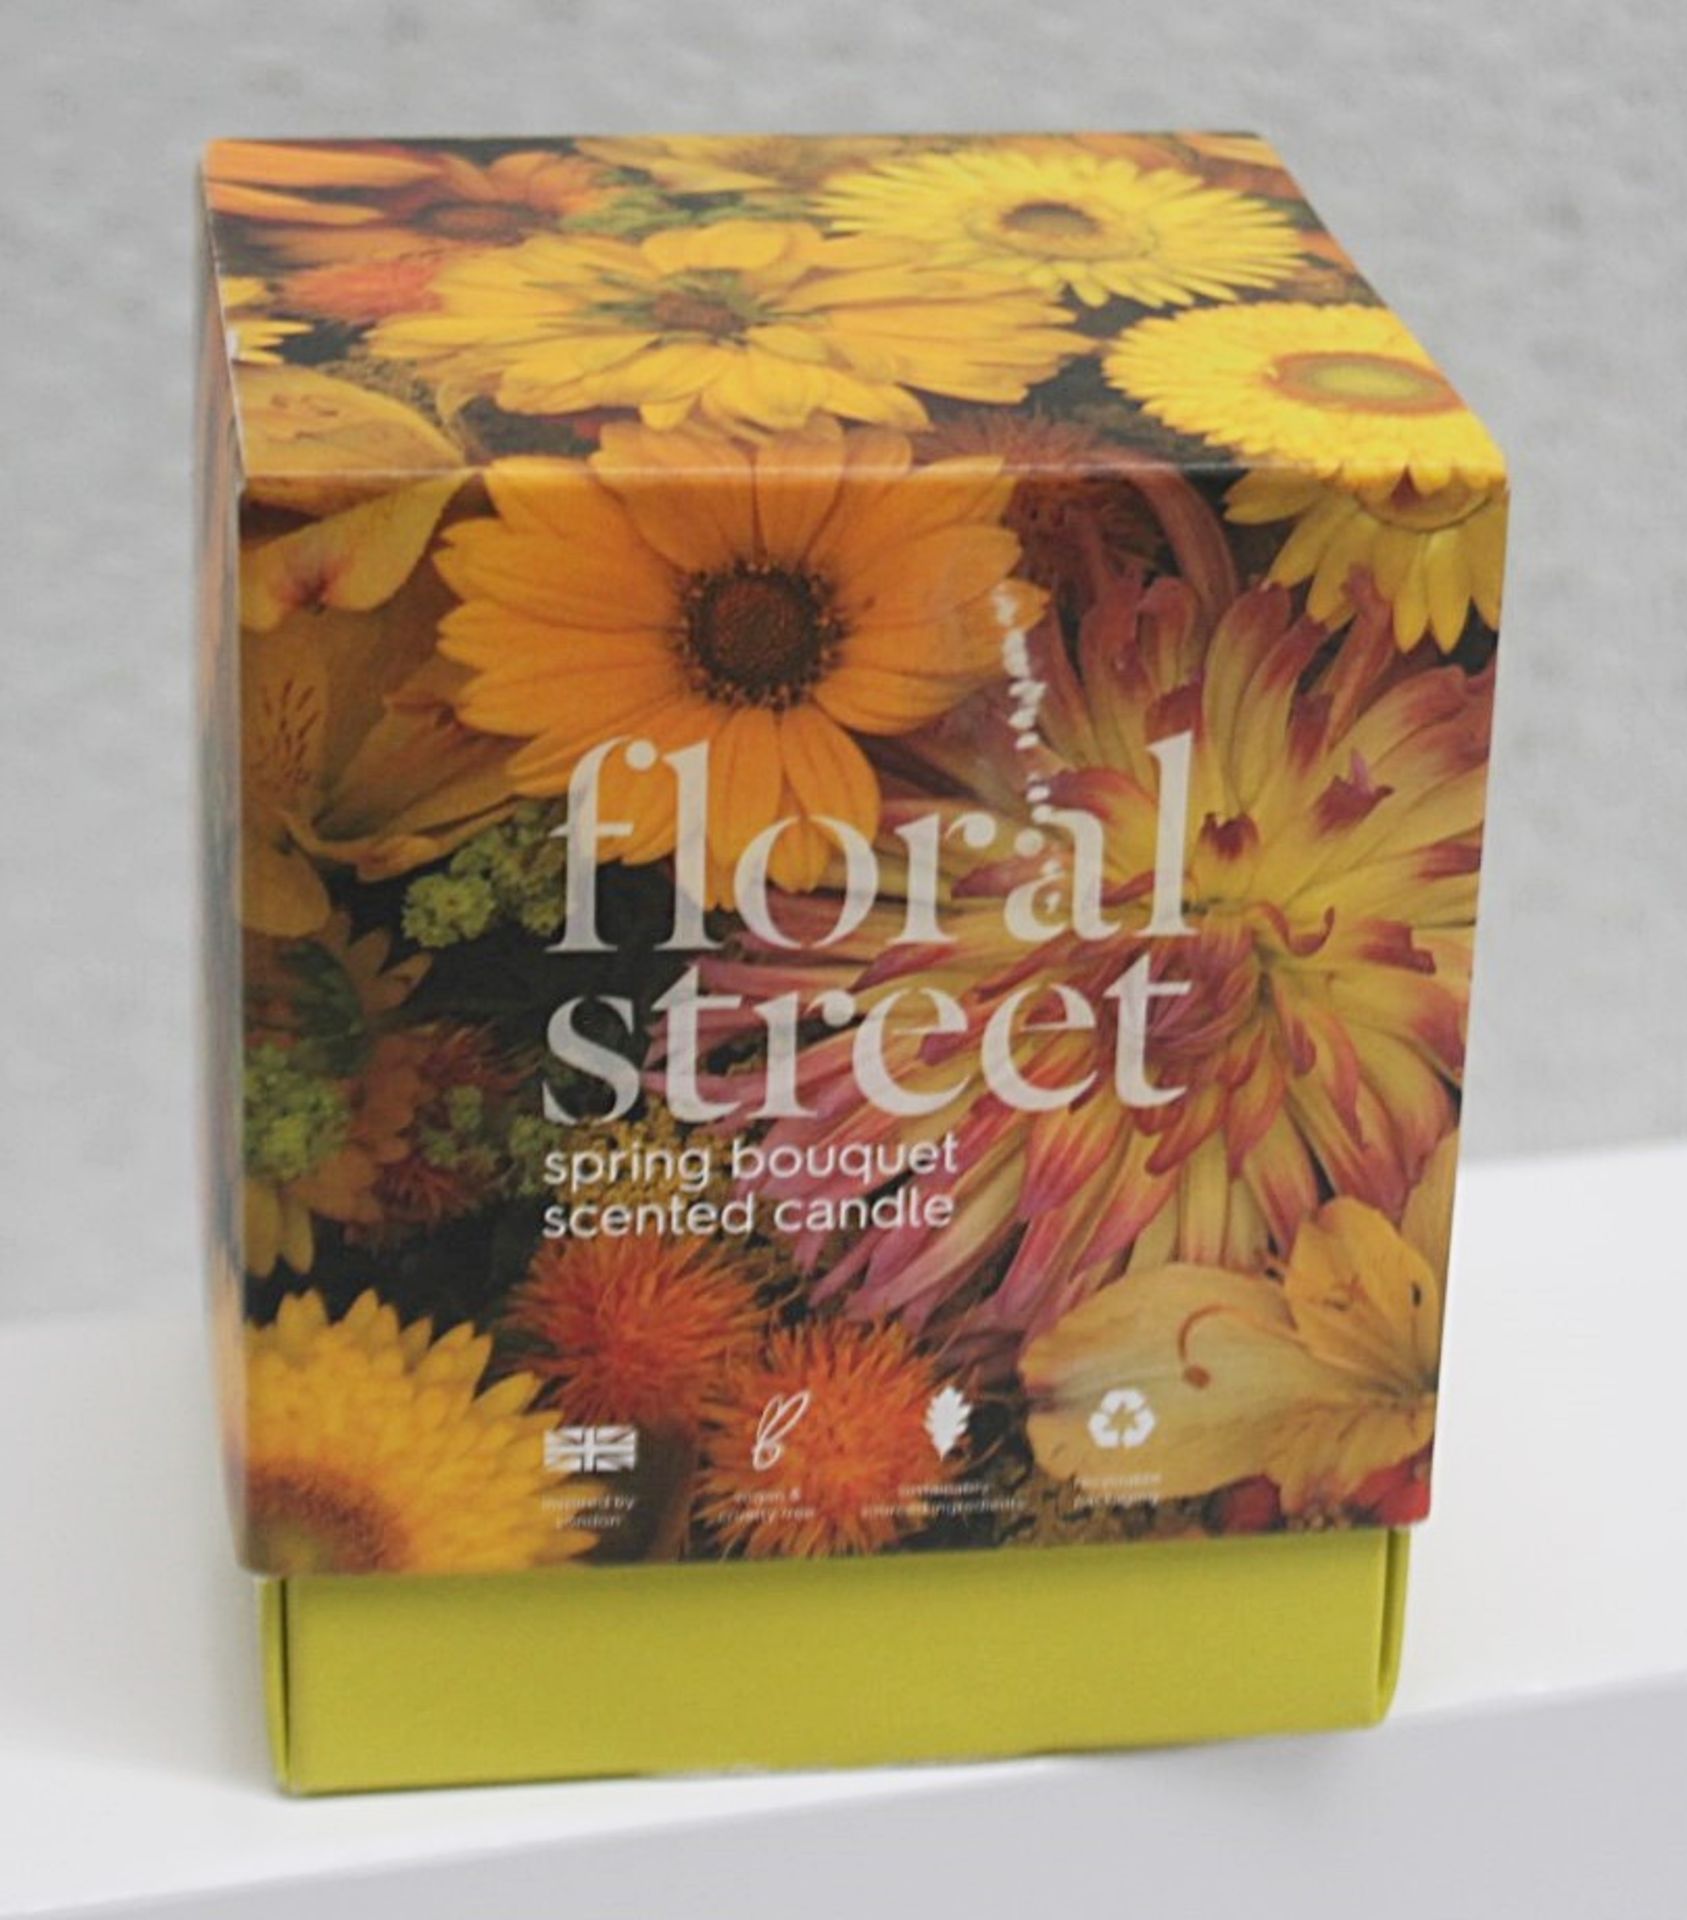 1 x FLORAL STREET Spring Bouquet Candle (200g) - Ref: 7153606/HAS/WH2-C7/02-23-1 - CL987 - Location: - Image 2 of 5